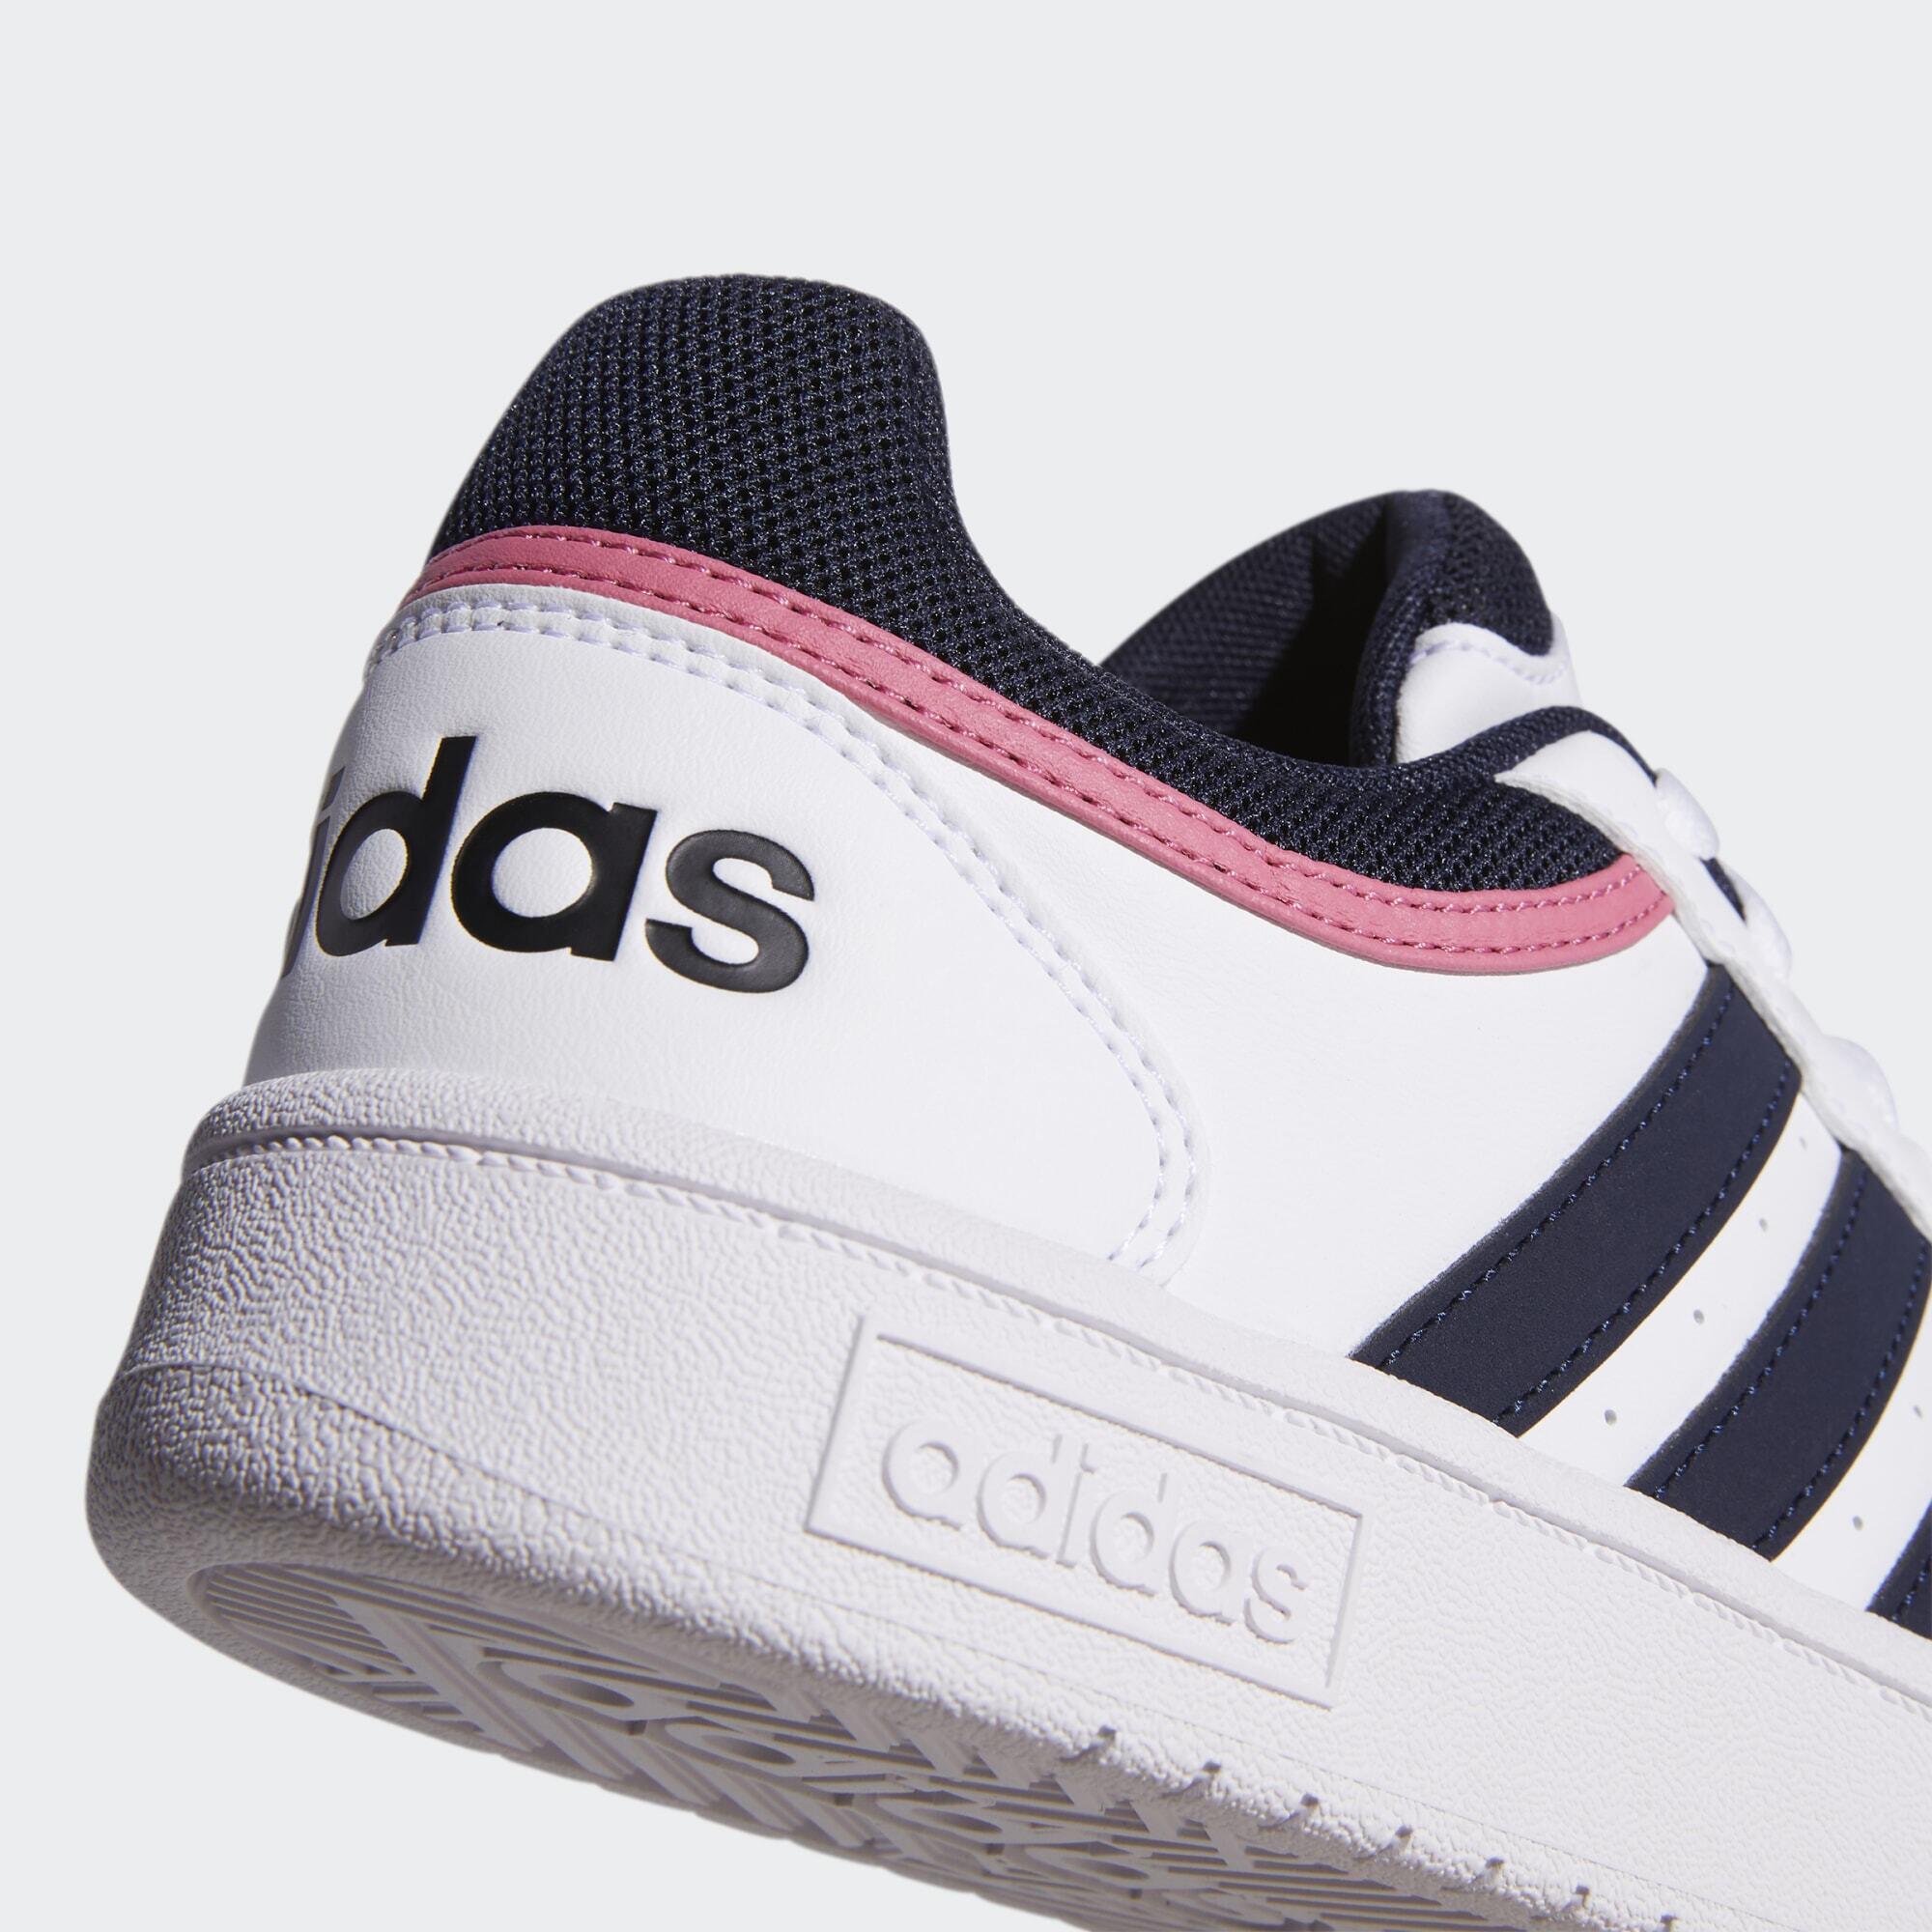 Hoops 3.0 Low Classic Shoes 6/7